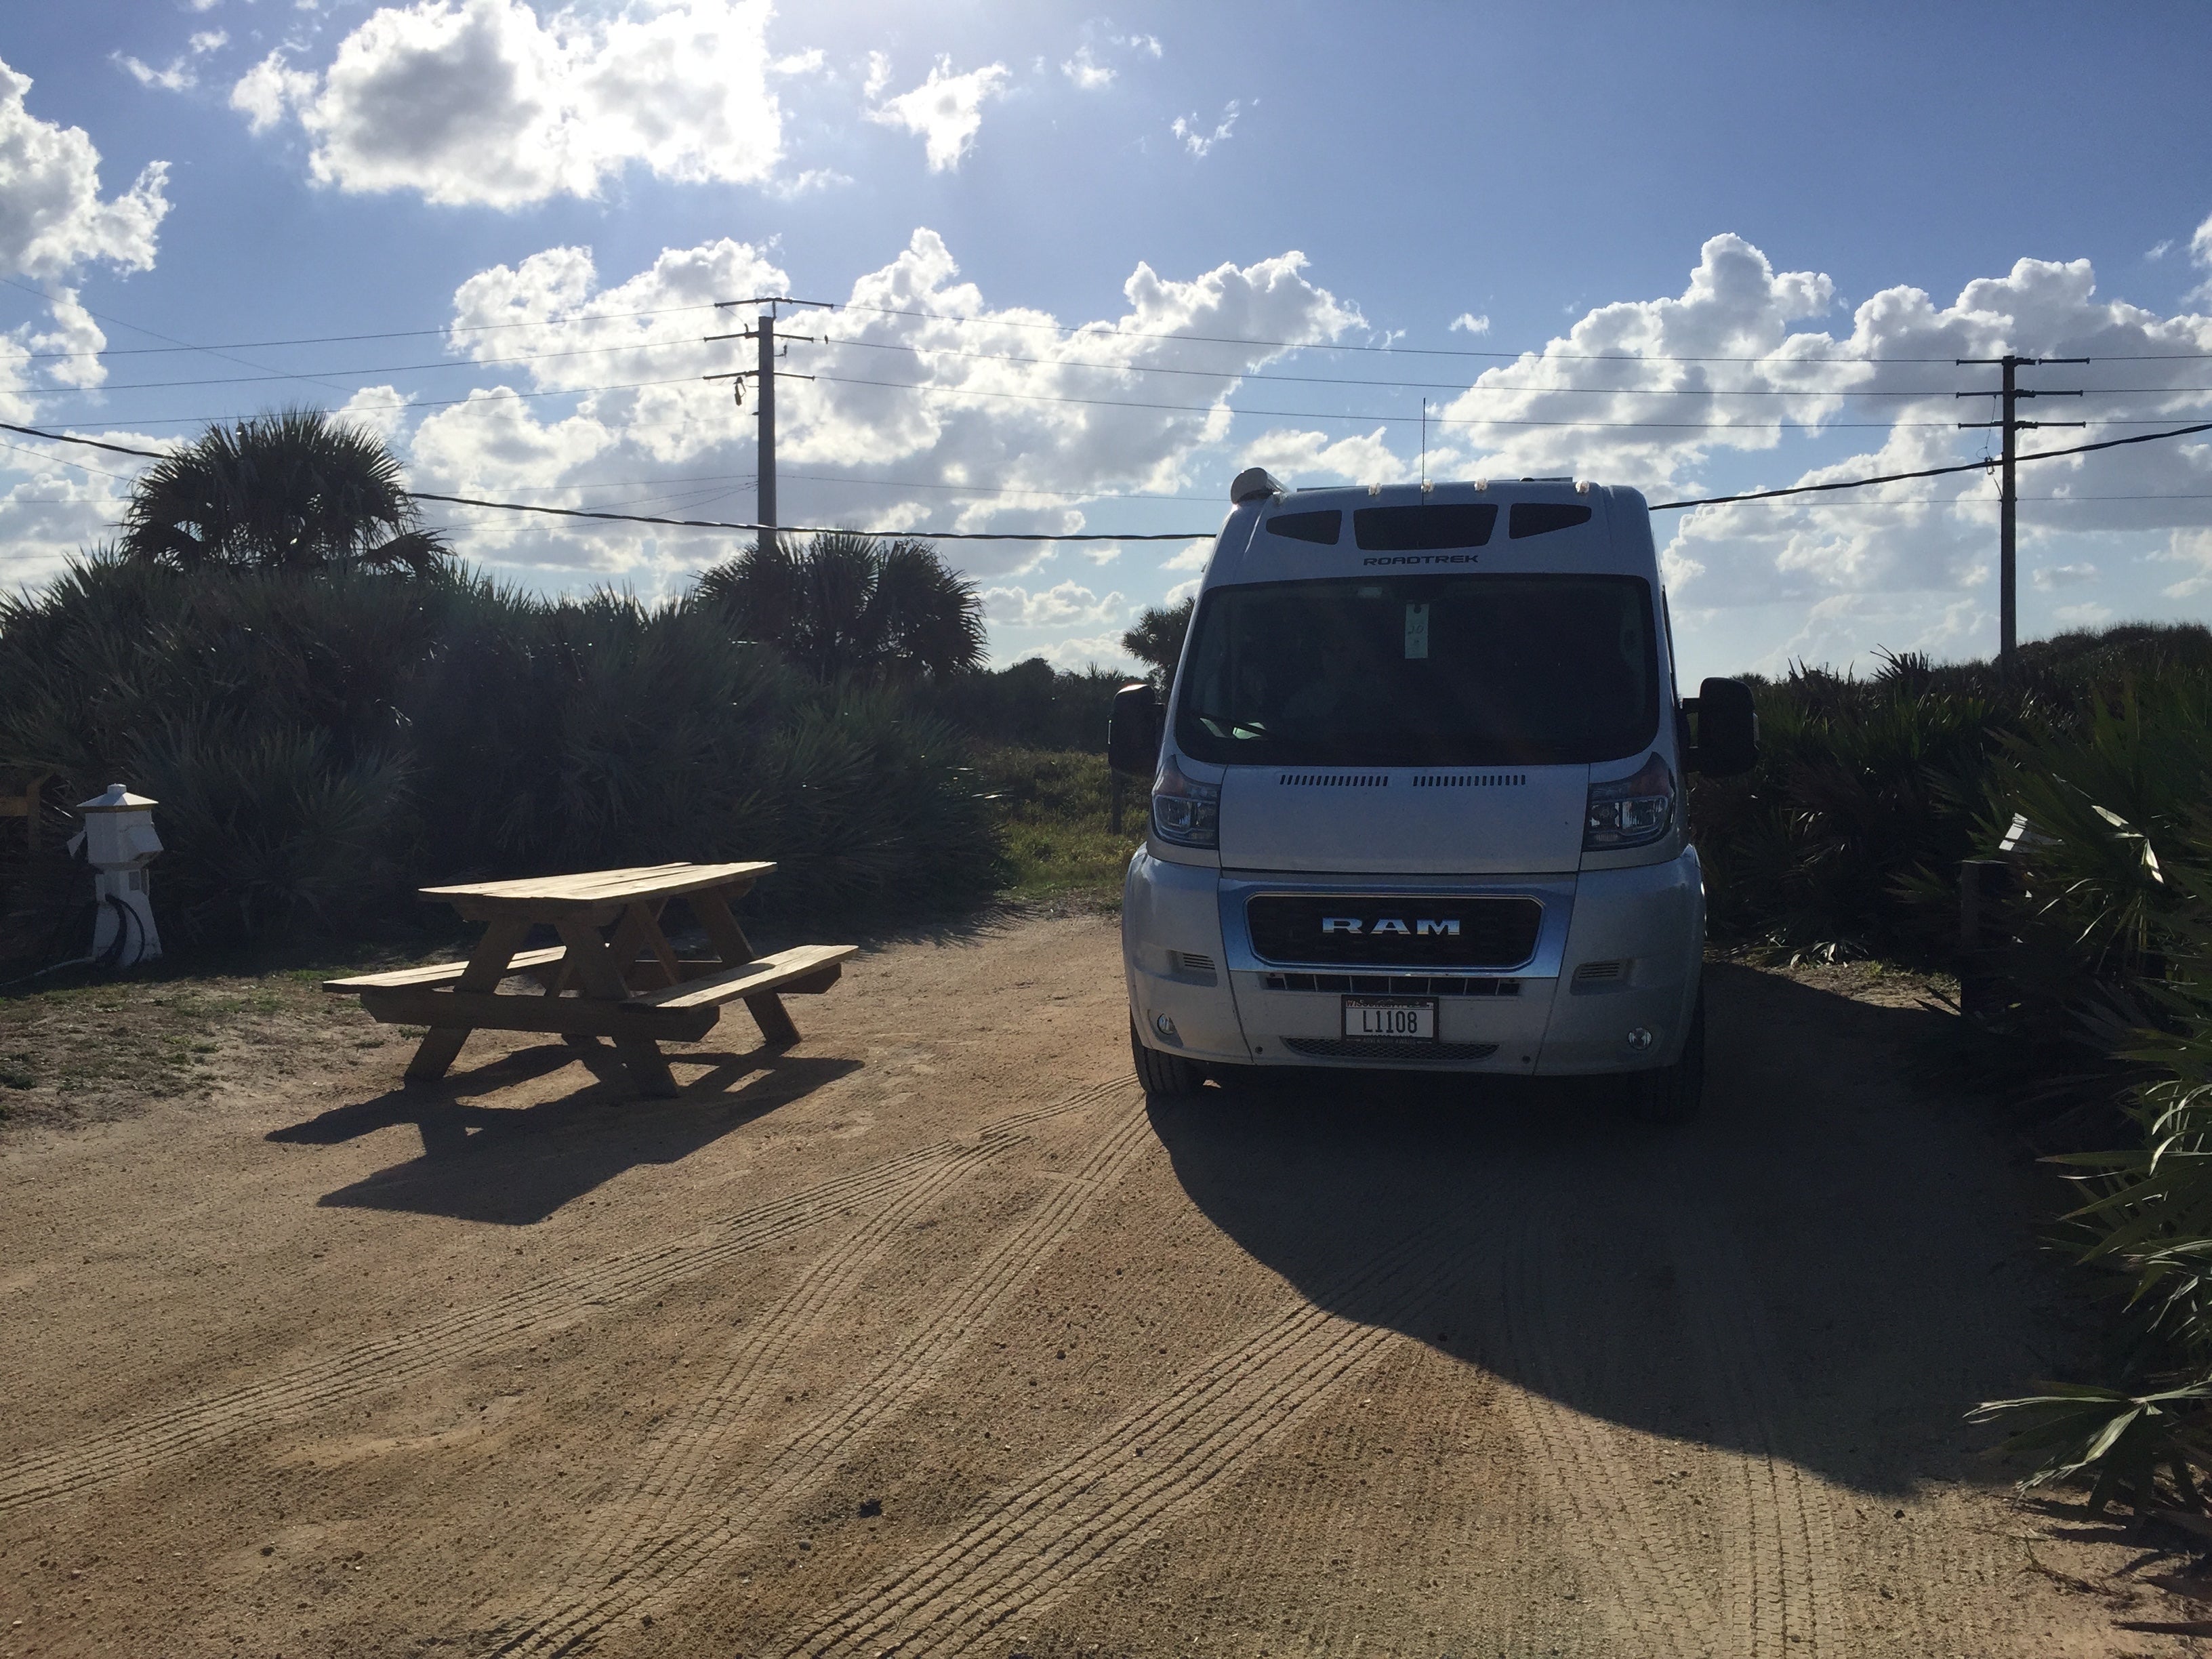 Camper submitted image from Gamble Rogers Memorial State Recreation Area - 1